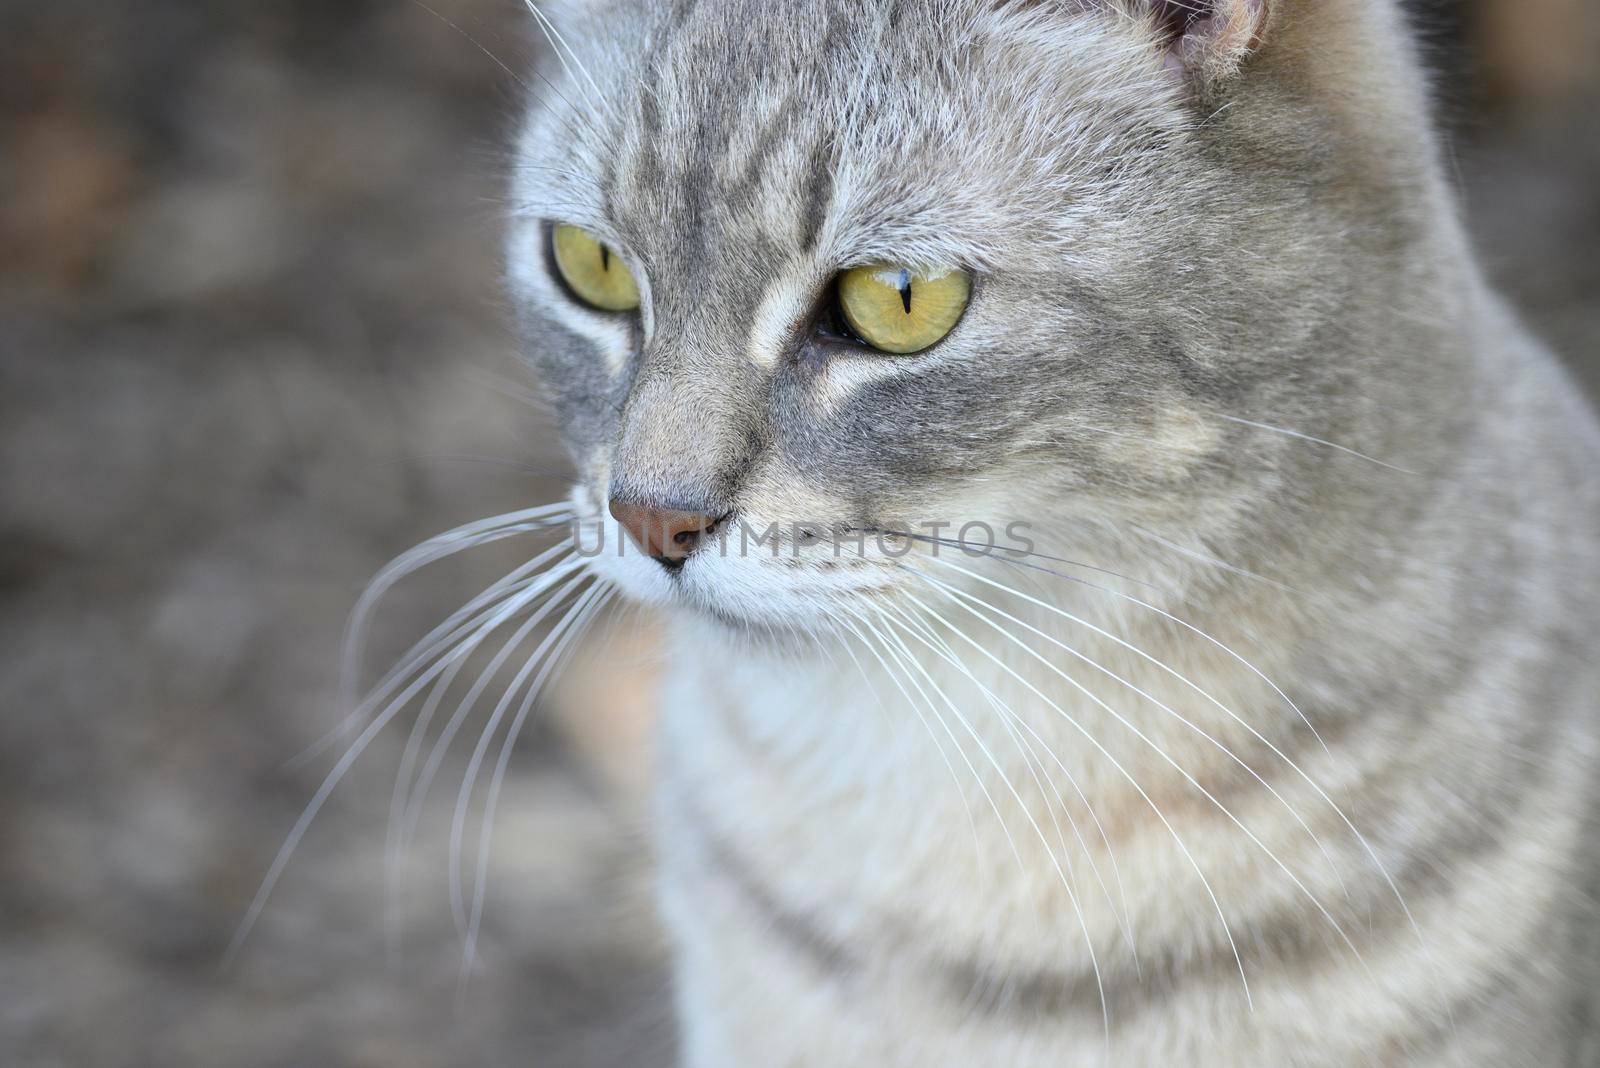 Grey, striped domestic cat looking curious  by AlessandroZocc